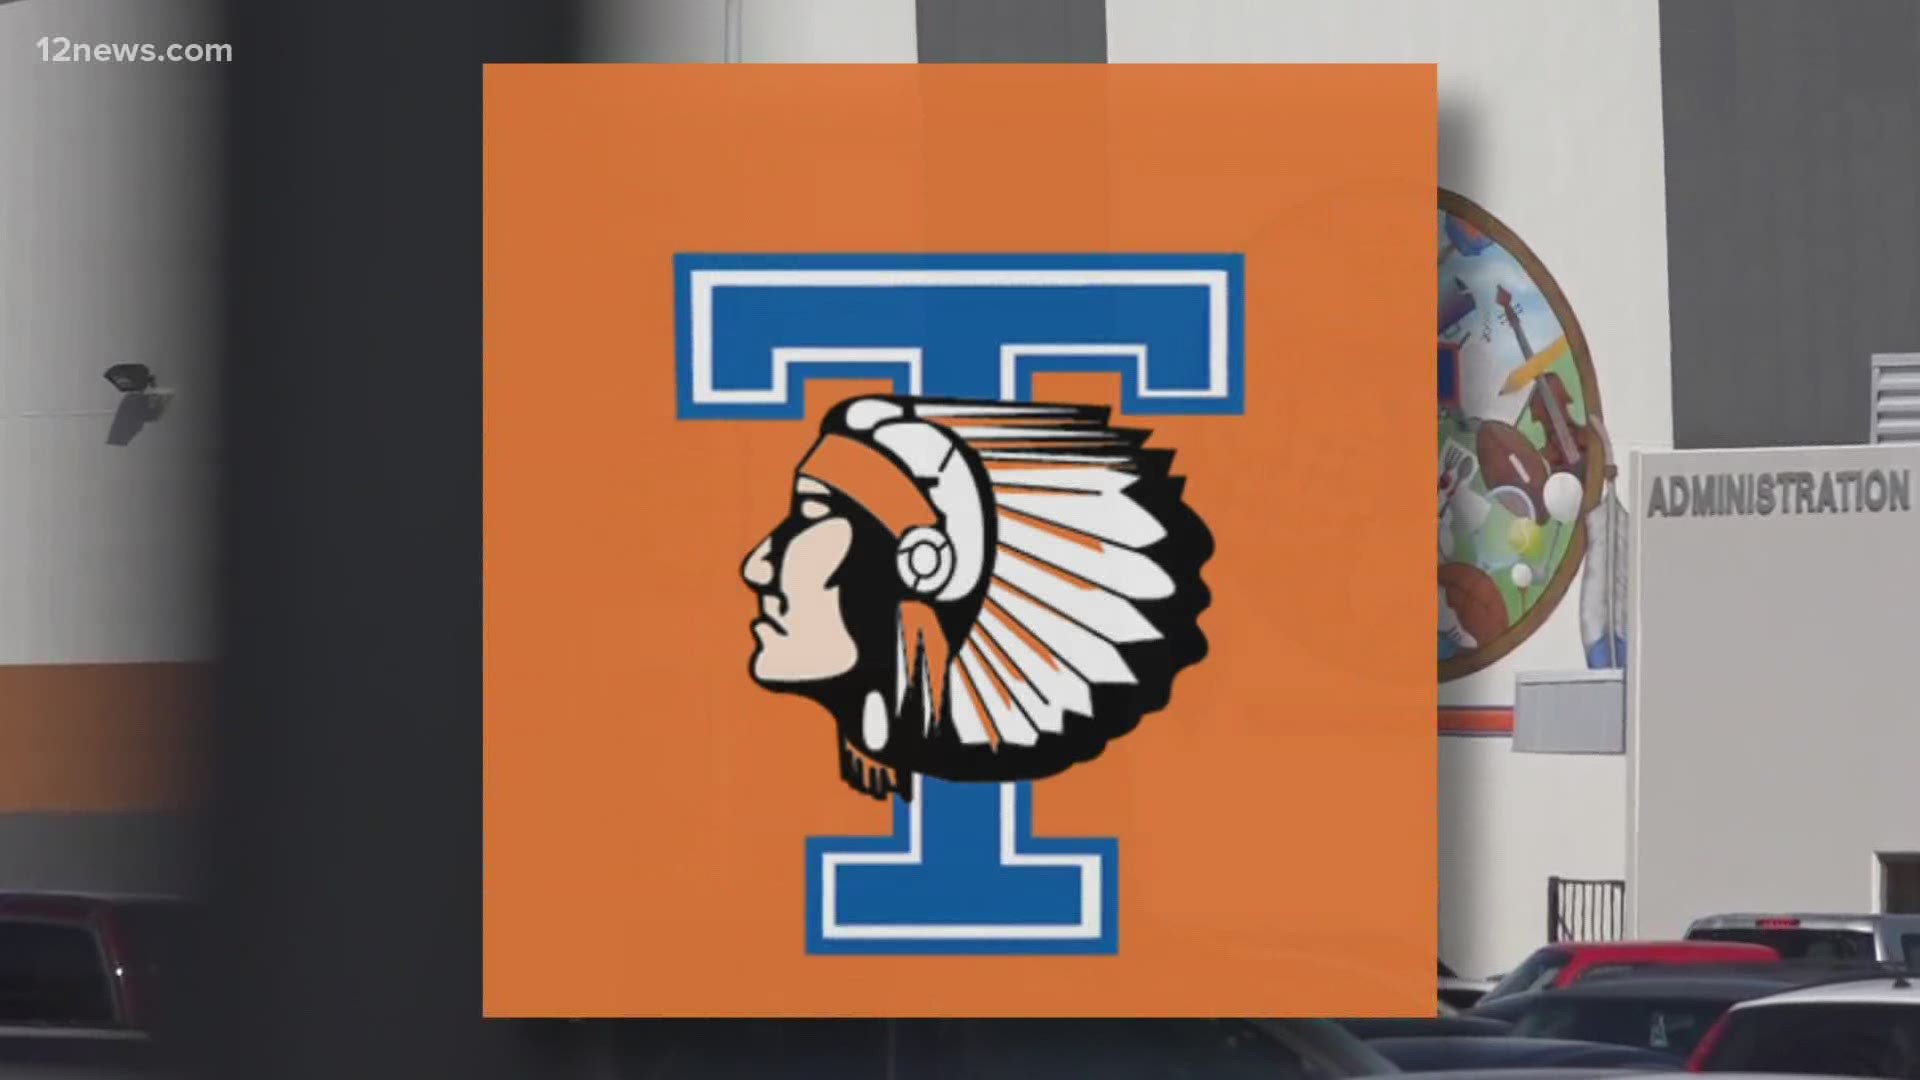 The Glendale Union High School district is in the process of changing the mascot of Thunderbird High School. They say the mascot is culturally insensitive.